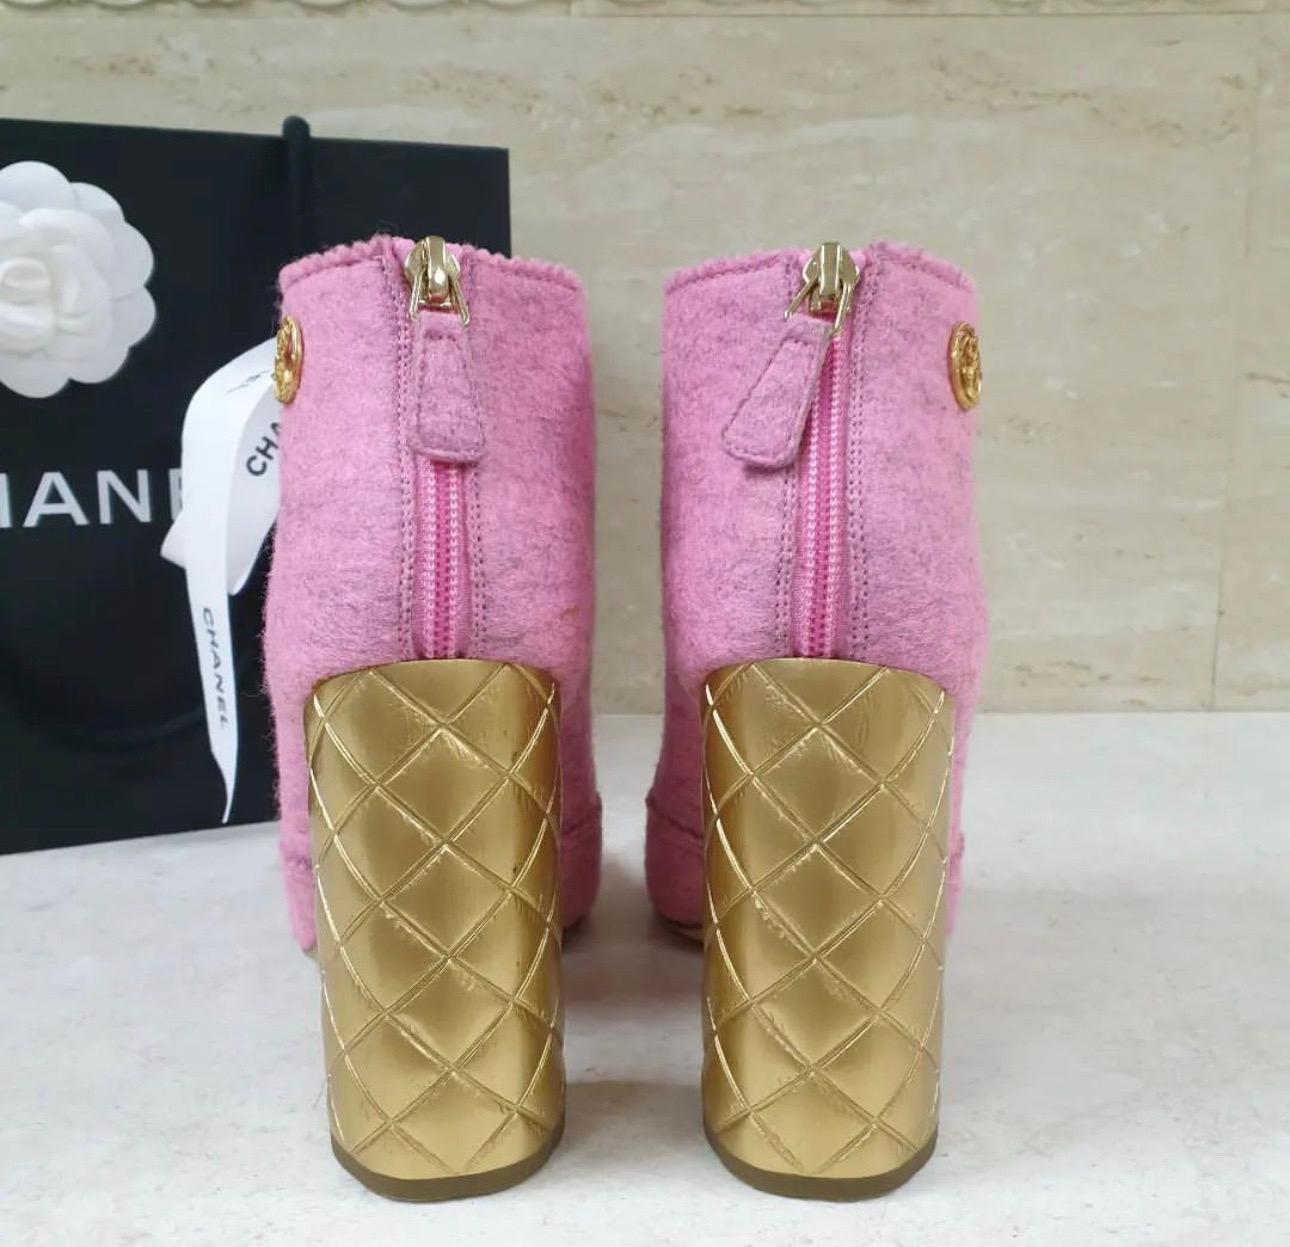 Chanel Textile  Booties

Paris-Salzburg

Sz.39

Very good condition. Minor signs of wear seen on pics.

No original packaging.